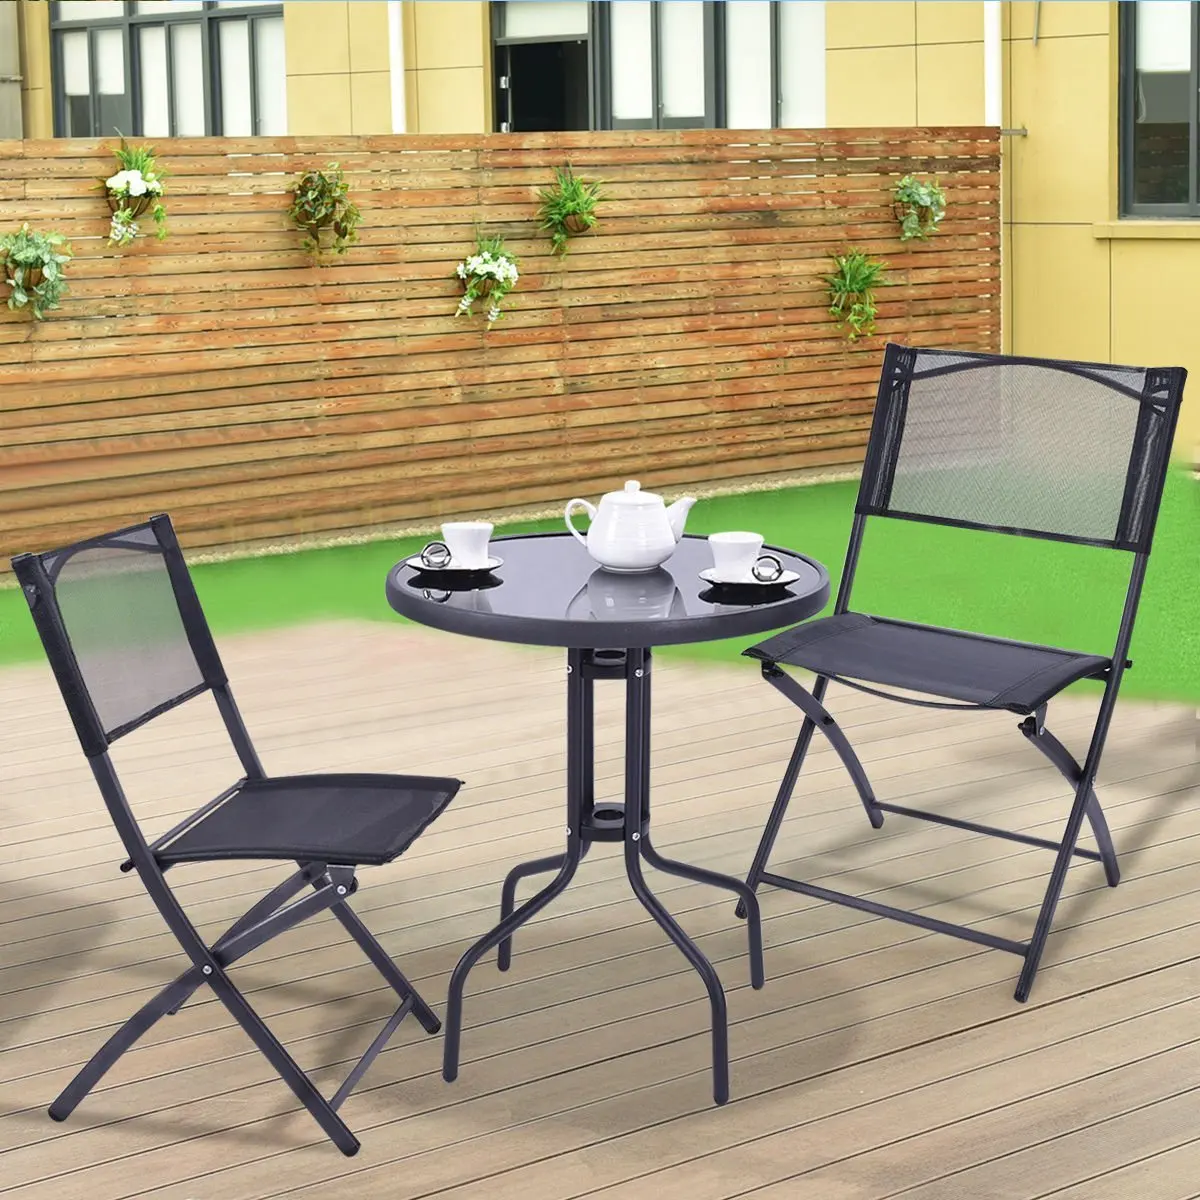 Cheap Garden Table And Chairs For Sale, find Garden Table And Chairs